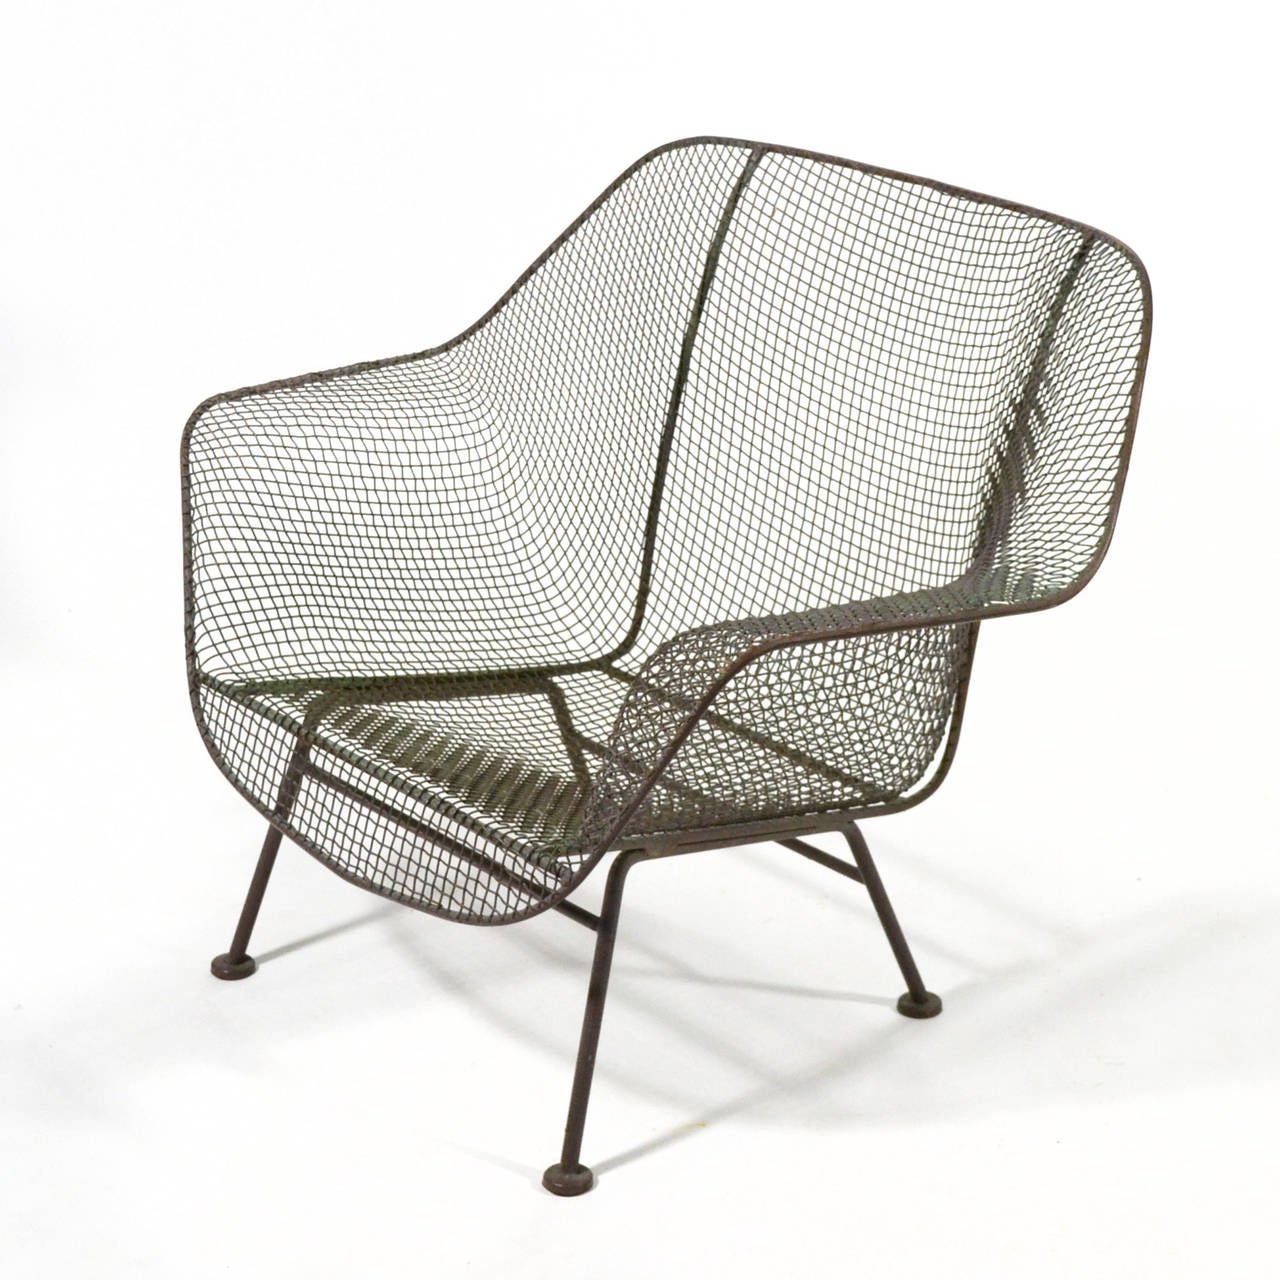 The Sculptura line by Russell Woodard is an enduring design for comfortable and long lasting modern outdoor furniture. The wrought iron frame covered in sculpted wire mesh references the organic designs of Eames and Saarinen and parallels their